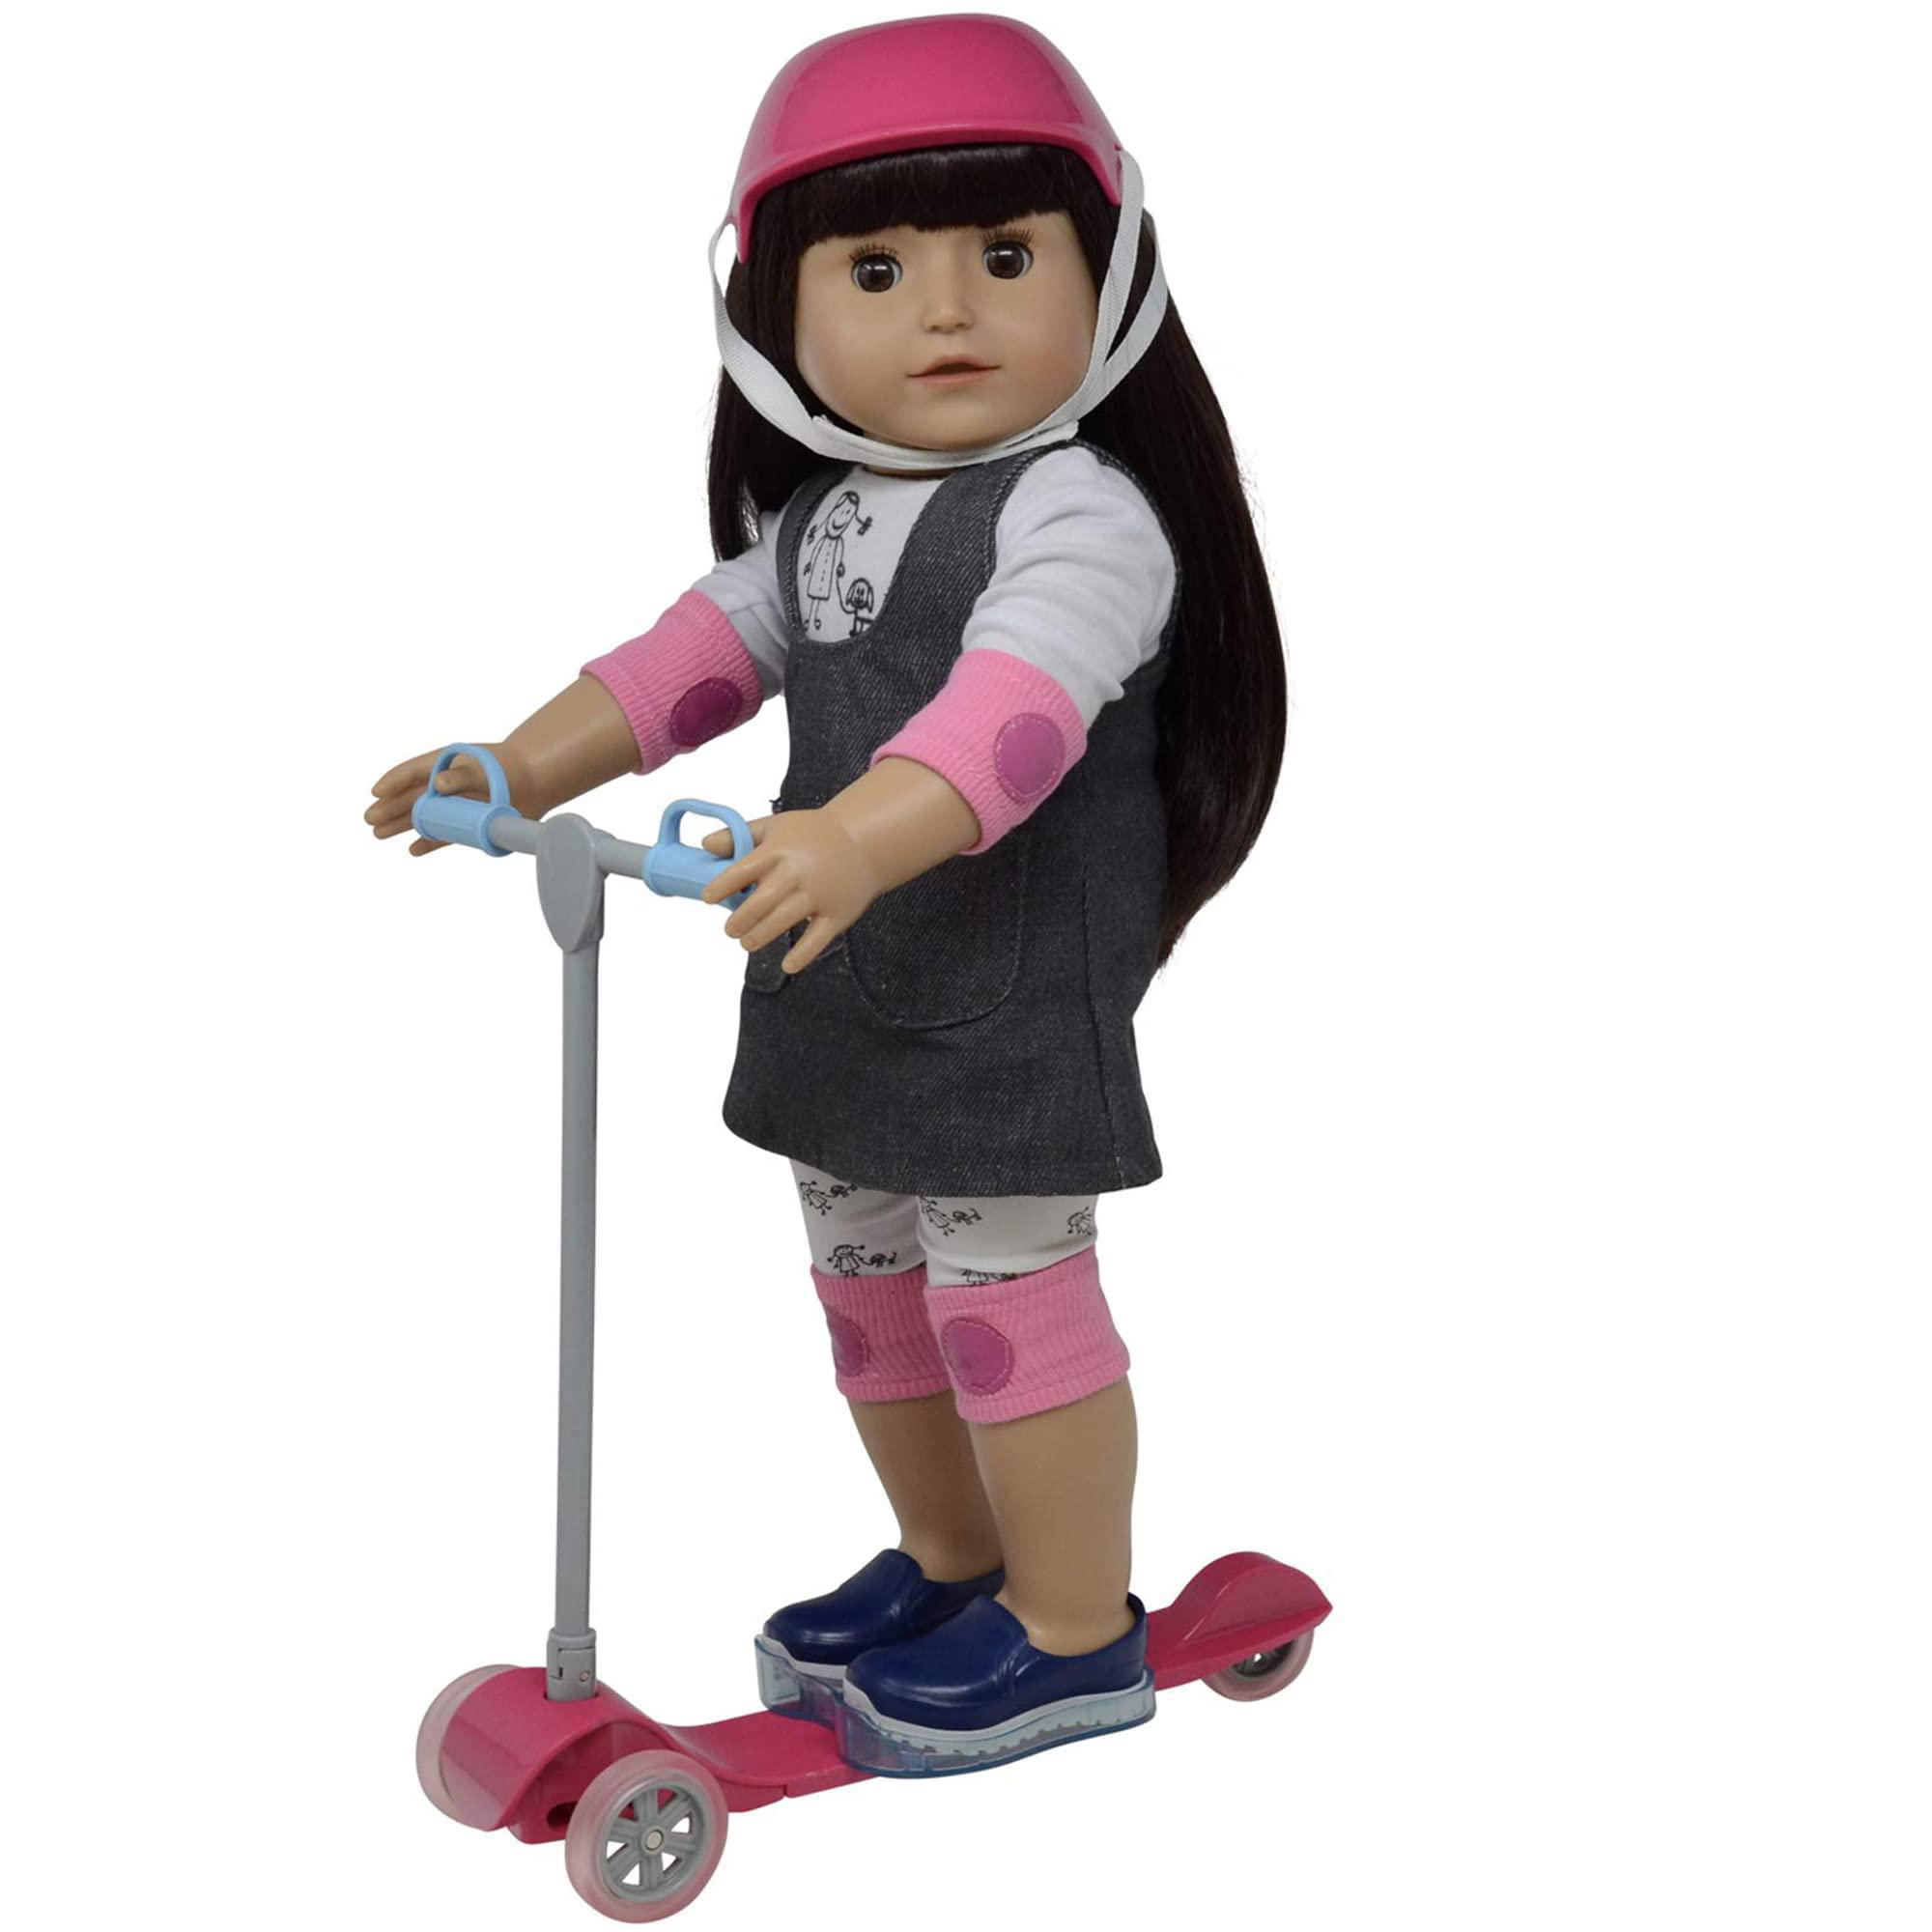 the new york doll collection 18" doll scooter & helmet set - 18in dolls accessories doll bike accessories play set and doll h